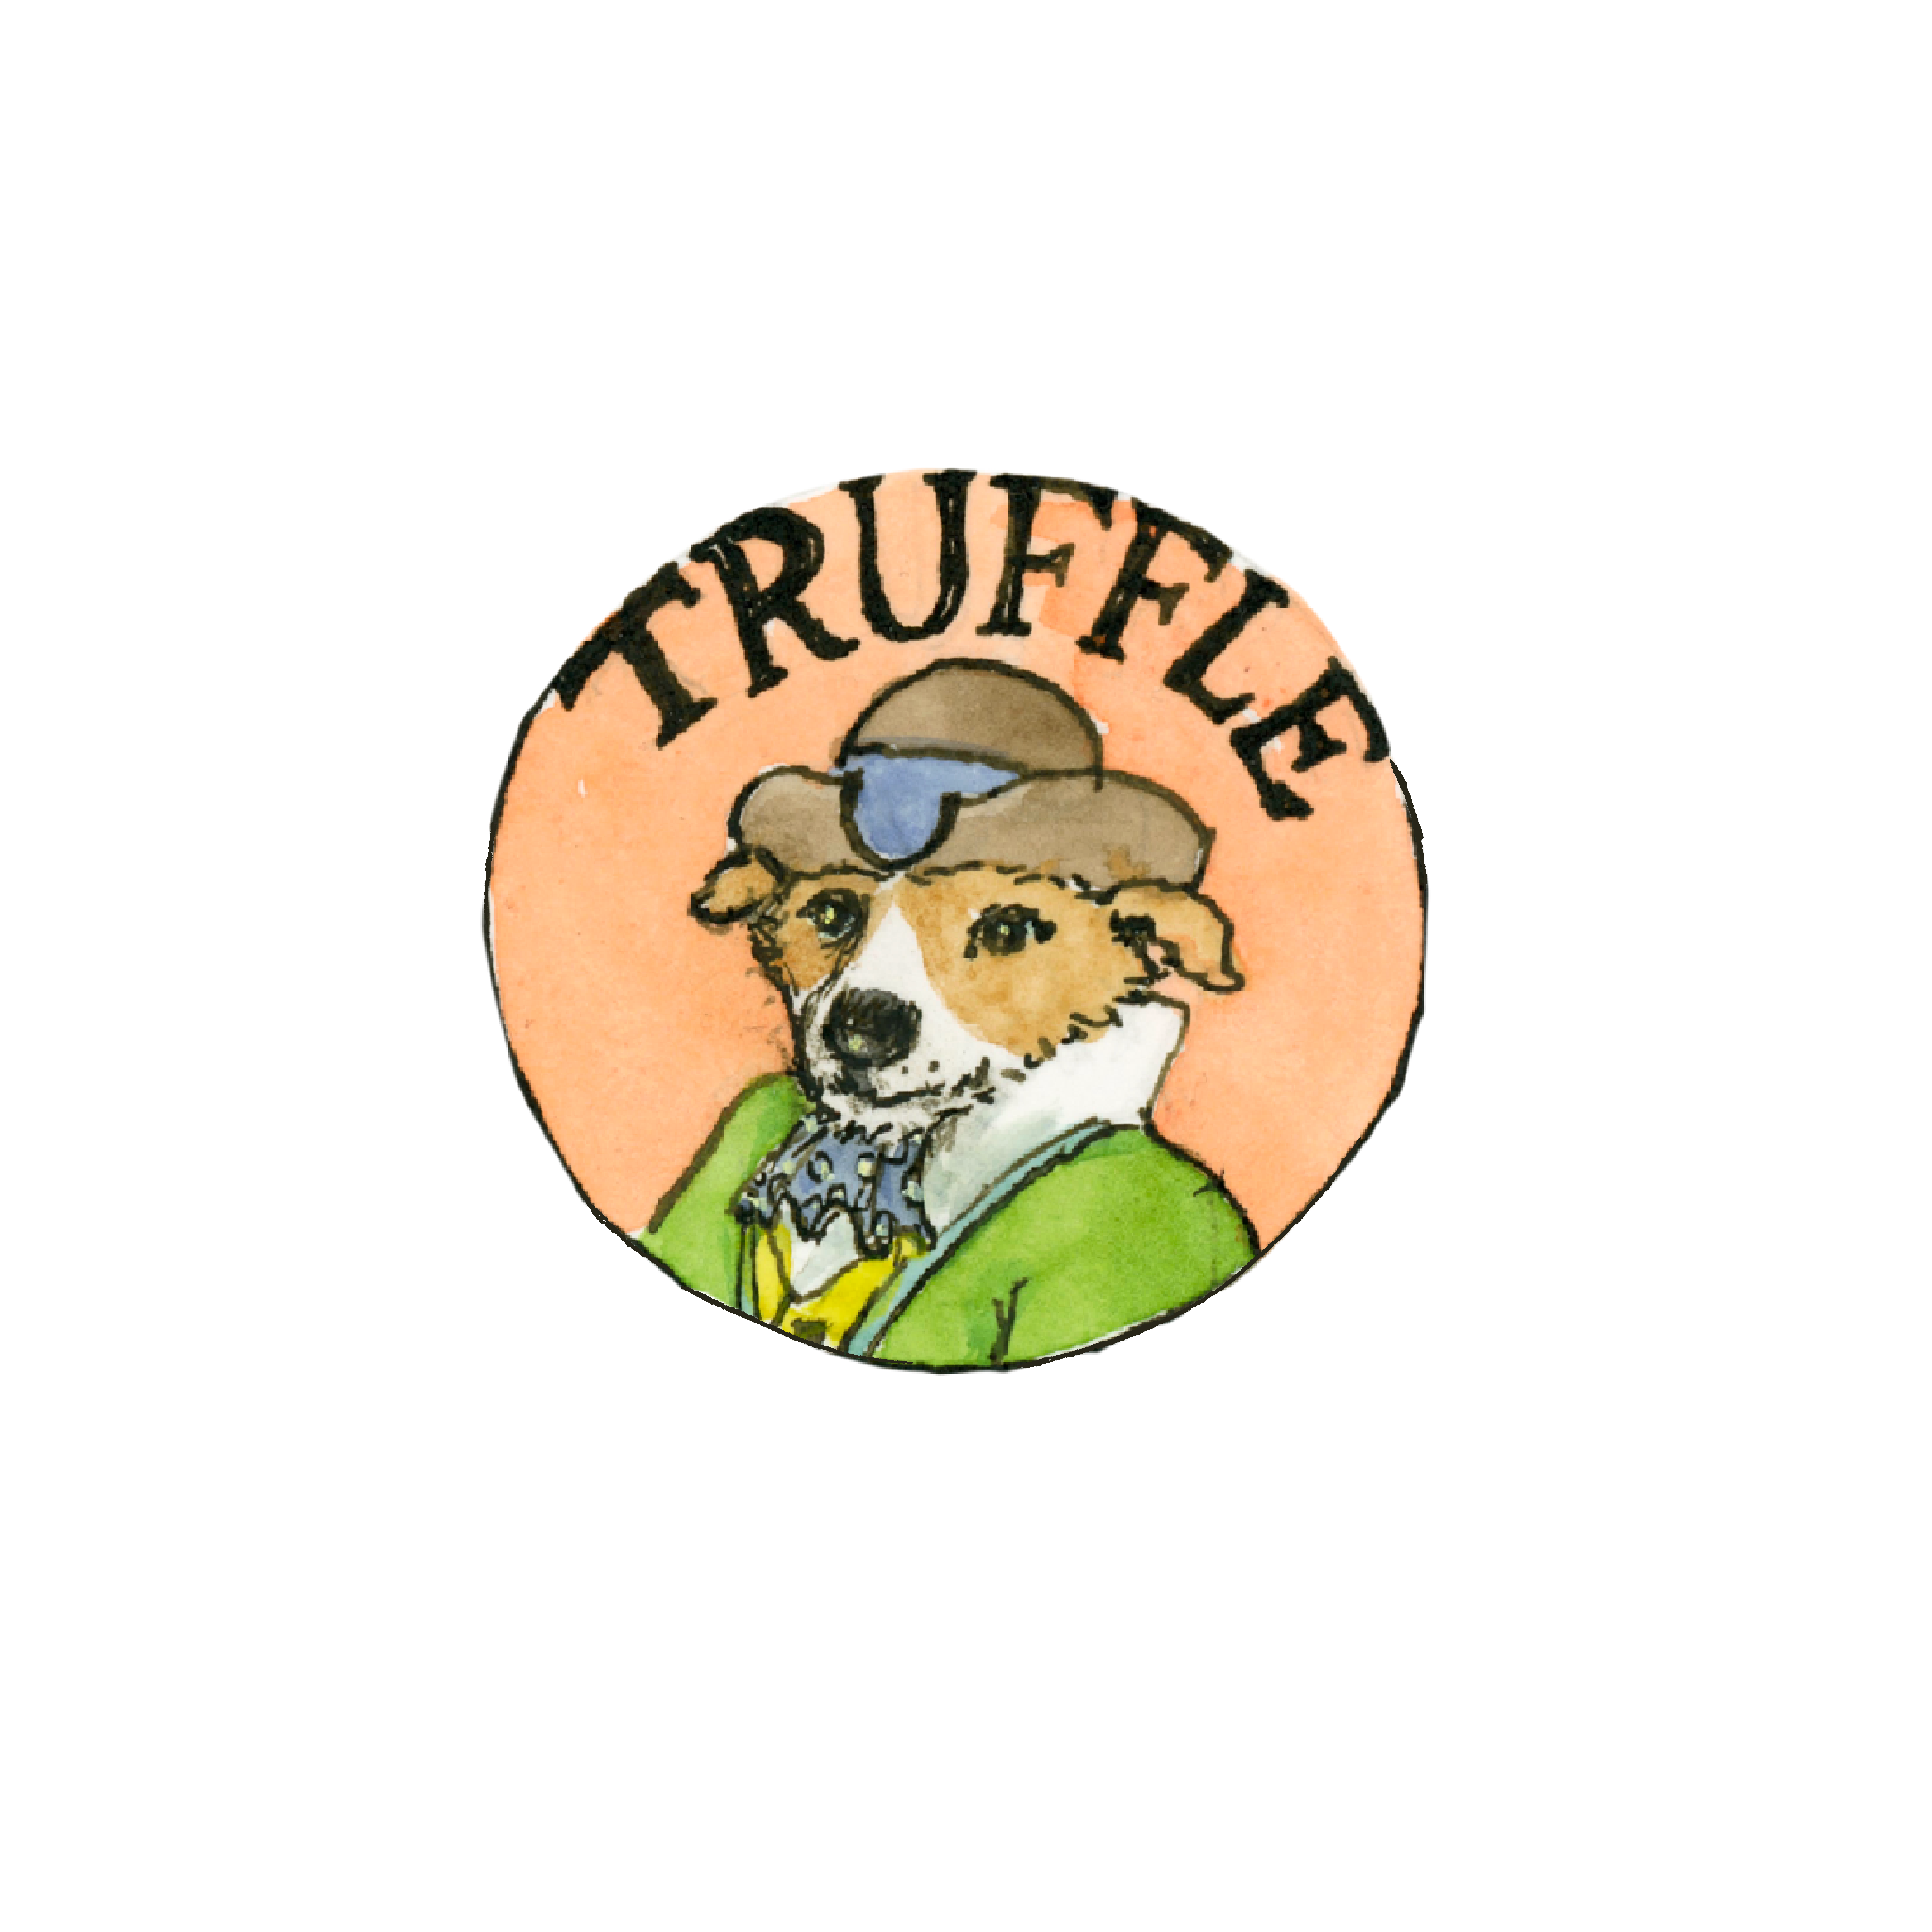 Truffle Dog in hat and green suit coat